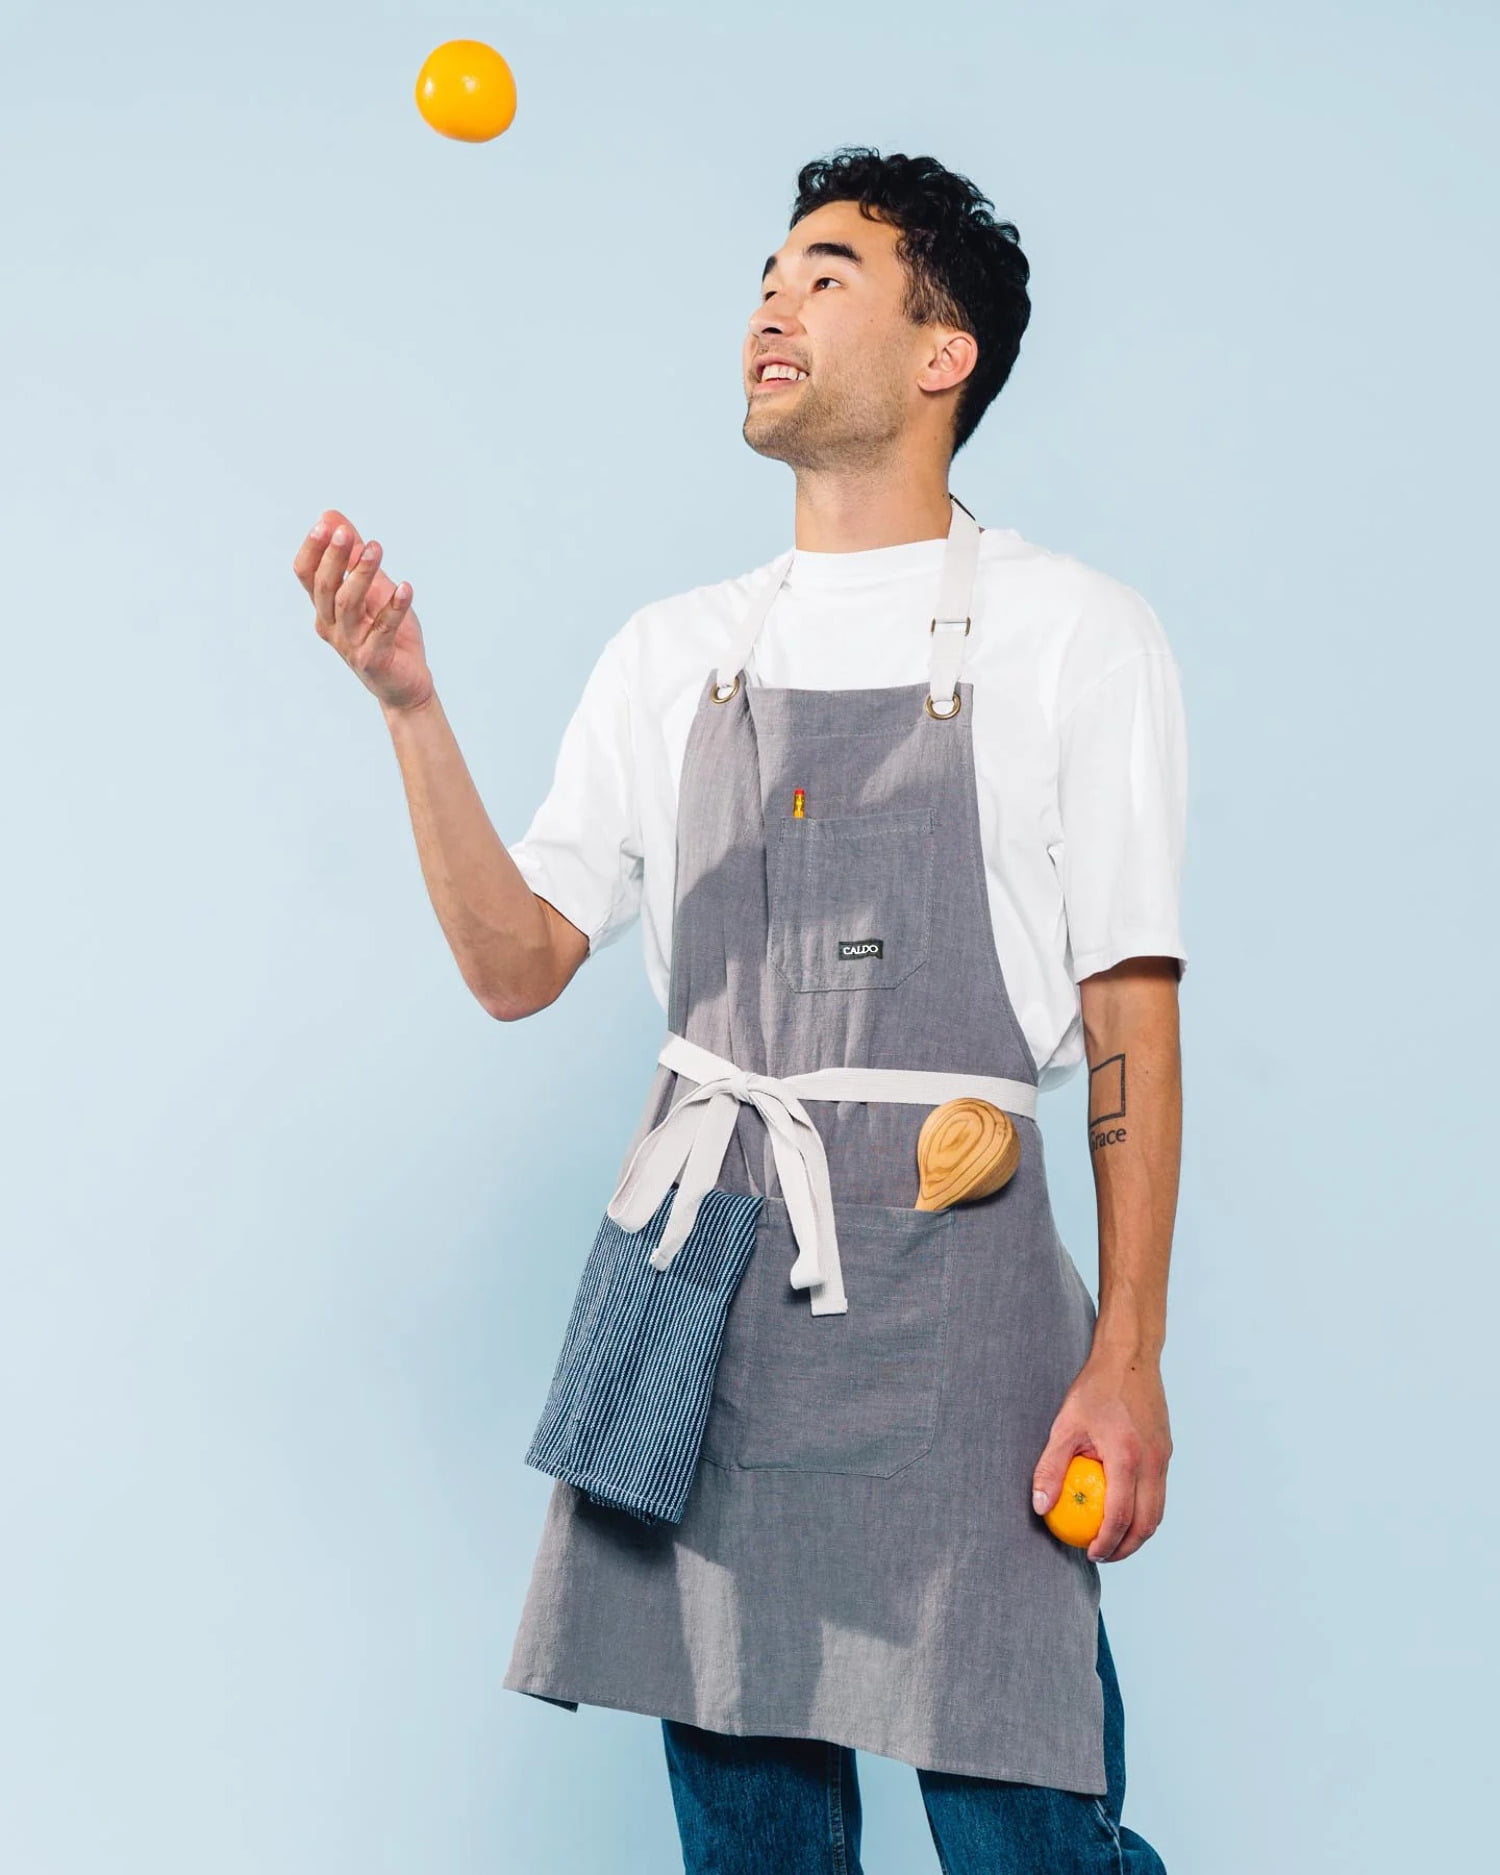 Caldo Daily Cotton Kitchen Apron for Cooking- Mens and Womens Professional  Chef or Server Bib Apron - Adjustable Straps with Pockets and Towel Loop